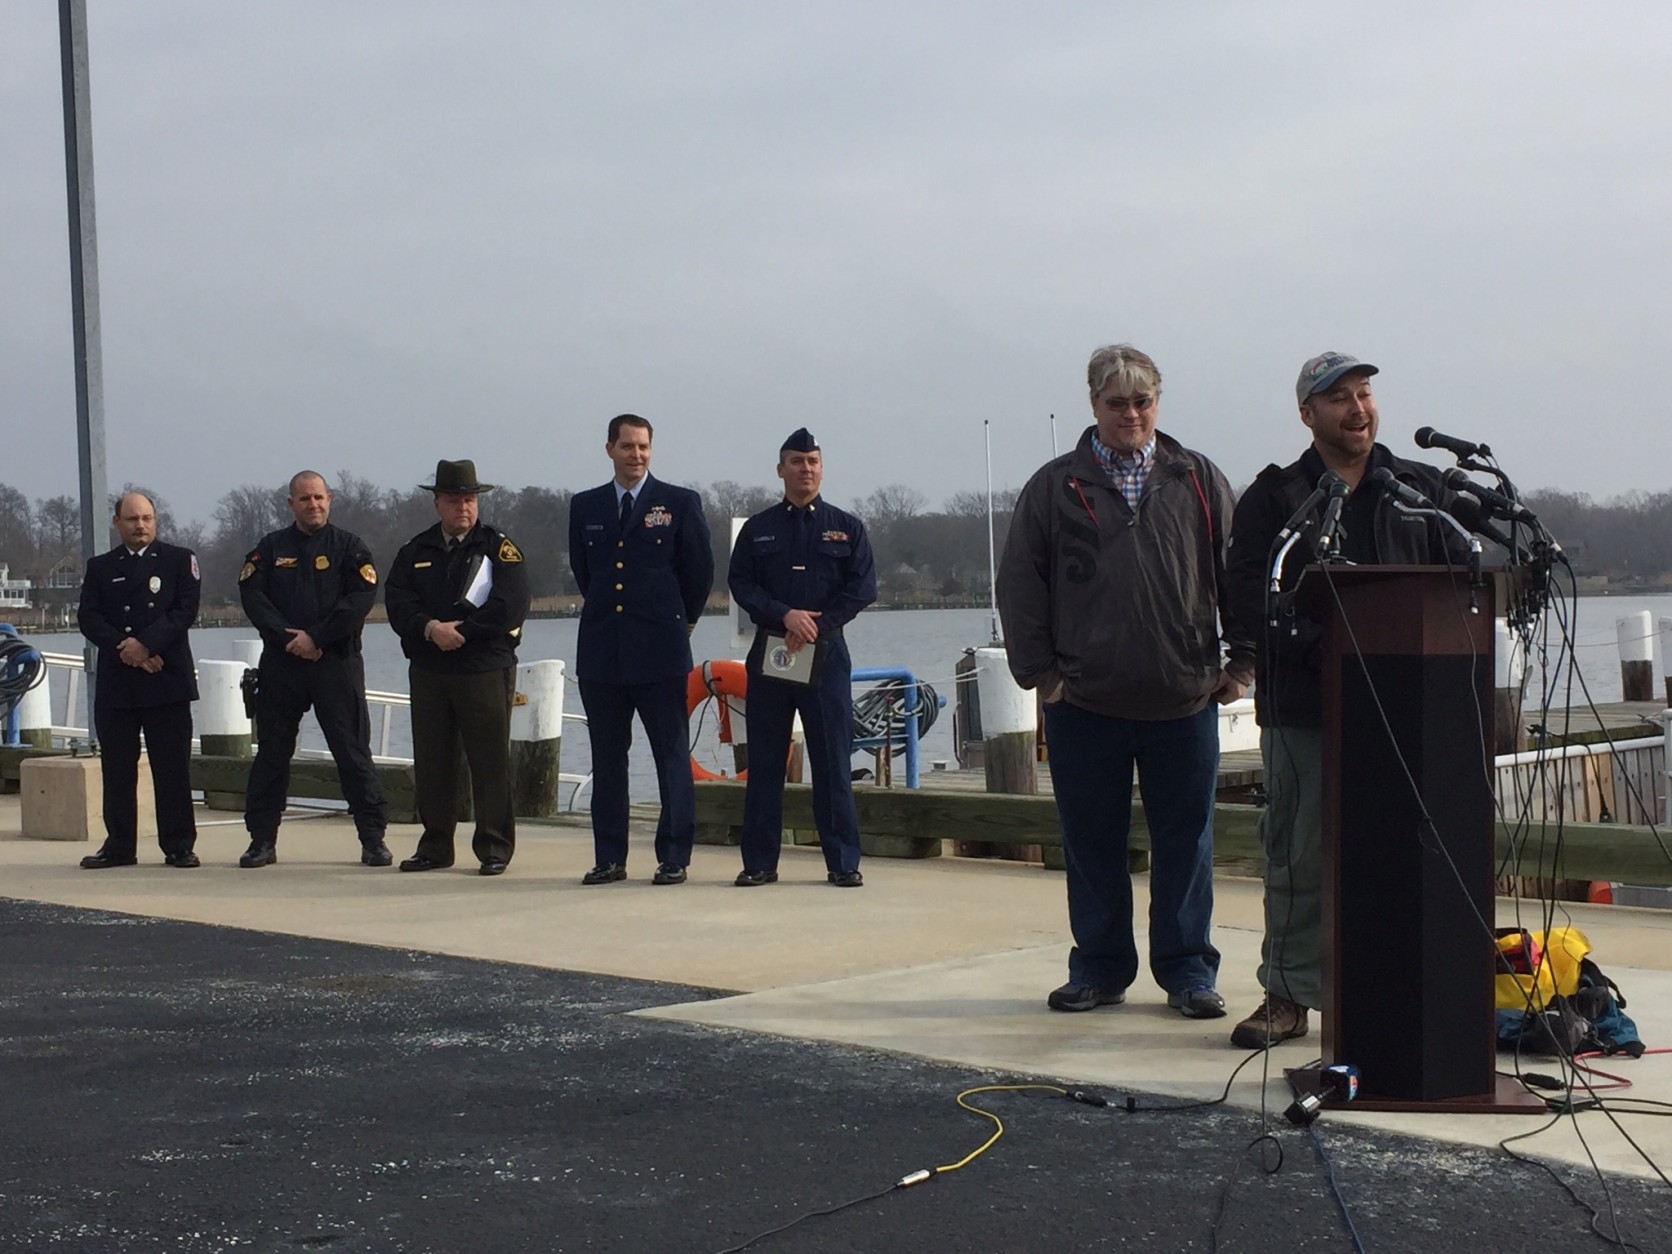 At an event at Coast Guard Station Annapolis, Stemcosky and Frend were reunited with the responders who saved them.